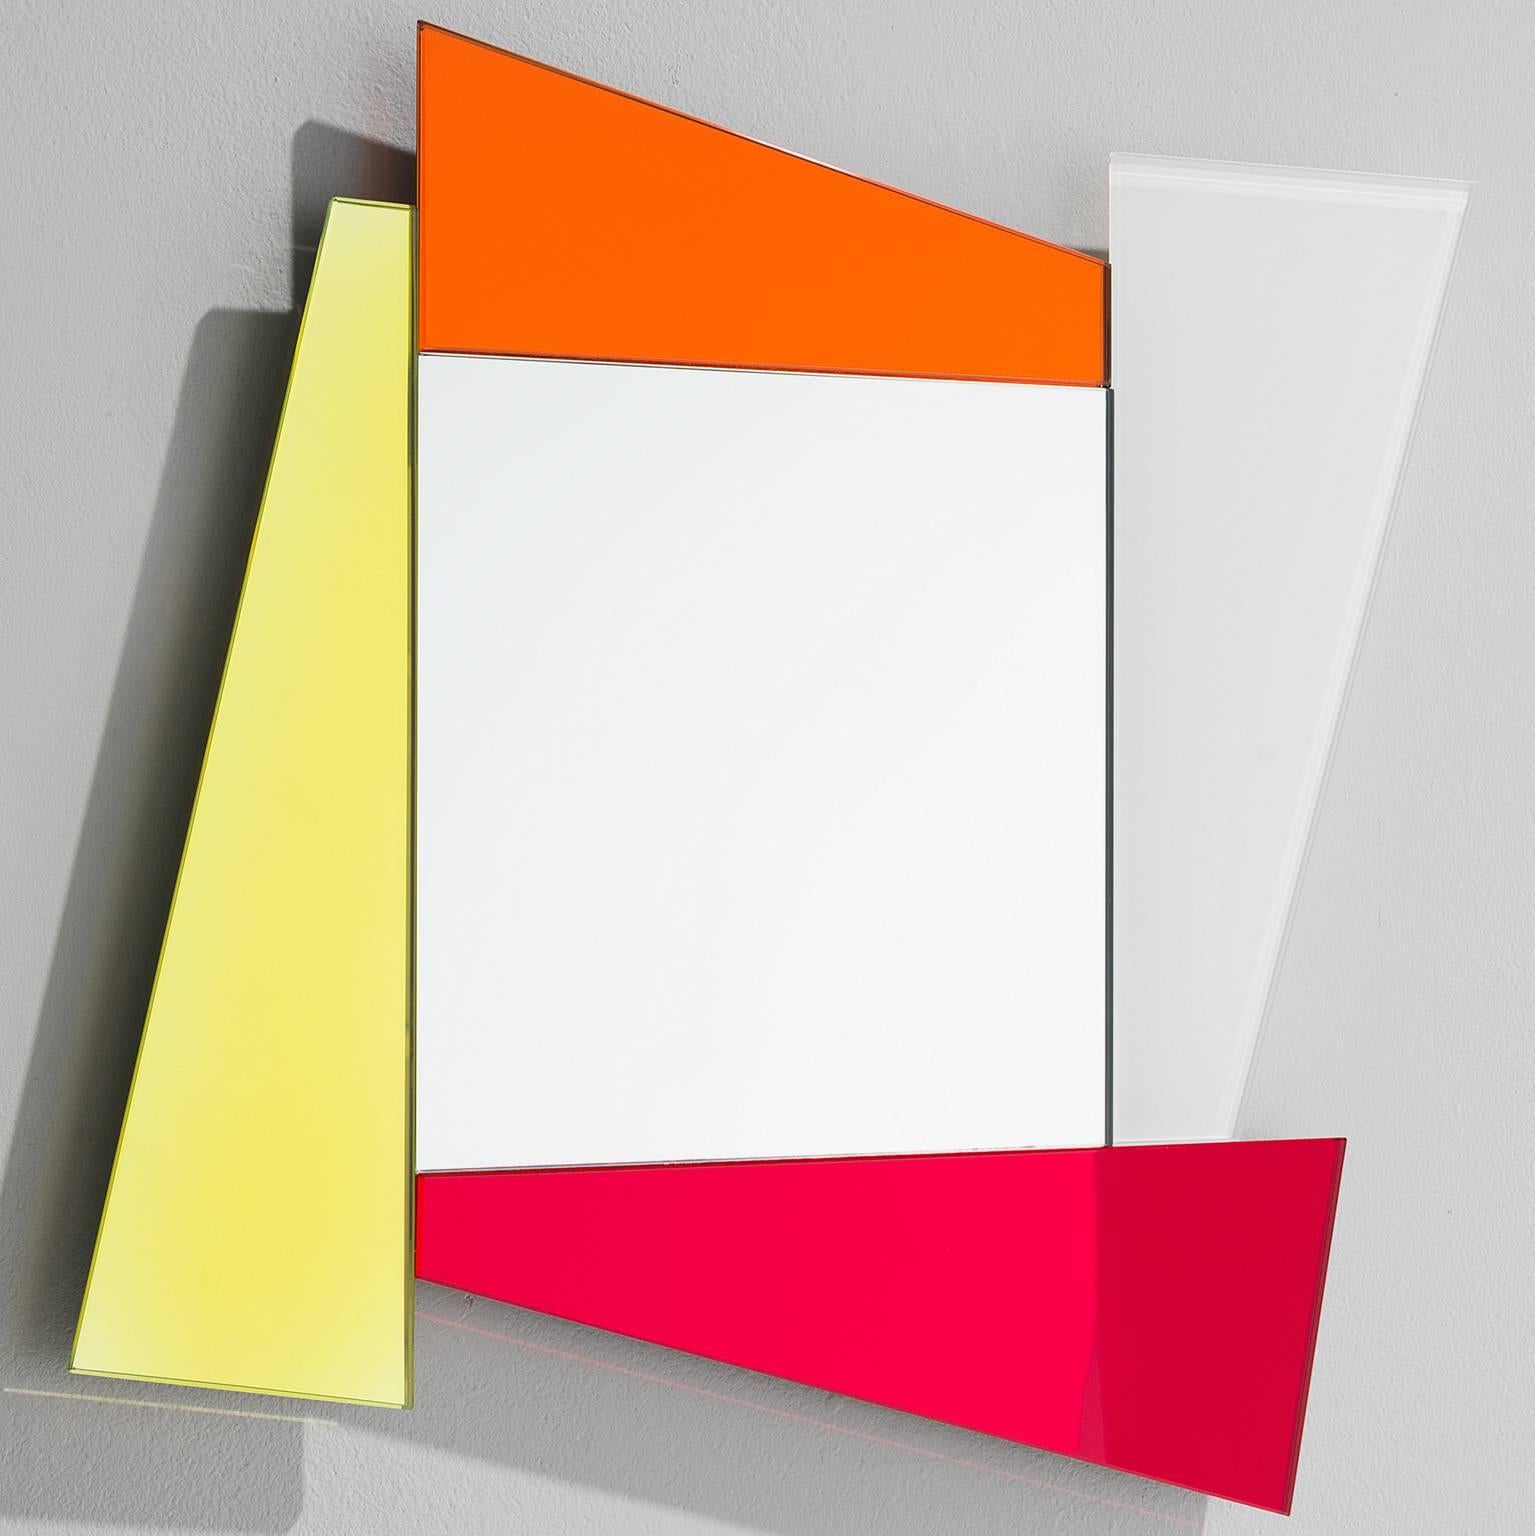 Ettore Sottsass for Glas, mirror, glass, Italy, design 1970s, production later.

Ettore Sottass designed this wall mirror in the 1970s, the era in which bold colors and shapes where used frequently. The mirror consists of various shapes and sizes